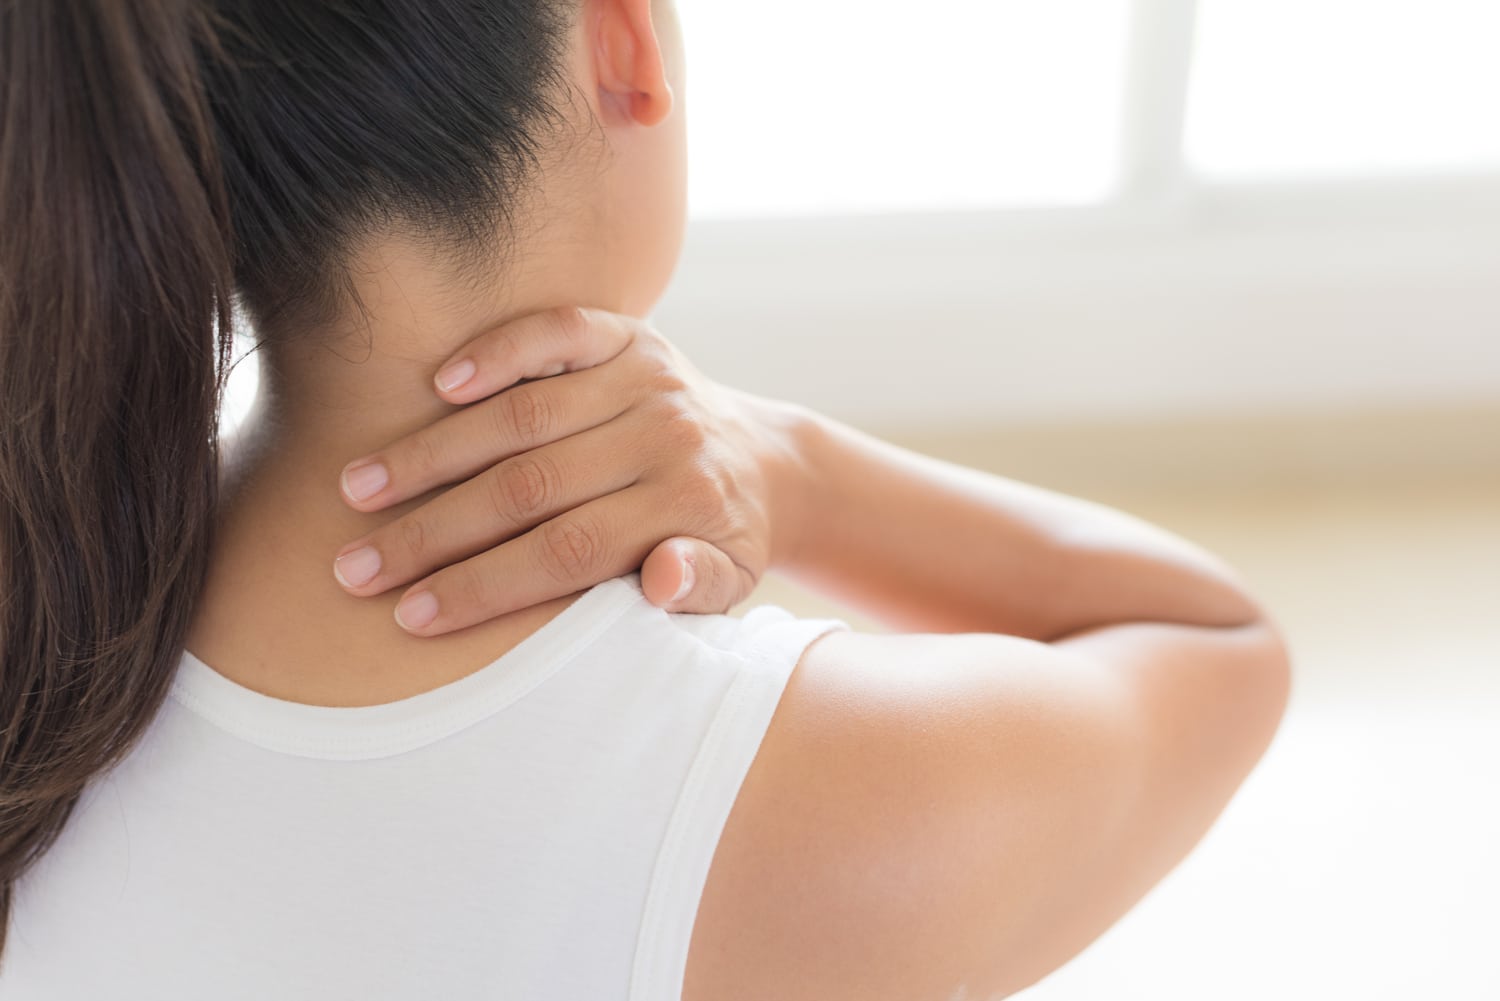 Neck Pain After a Crash Doesn’t Always Mean Whiplash